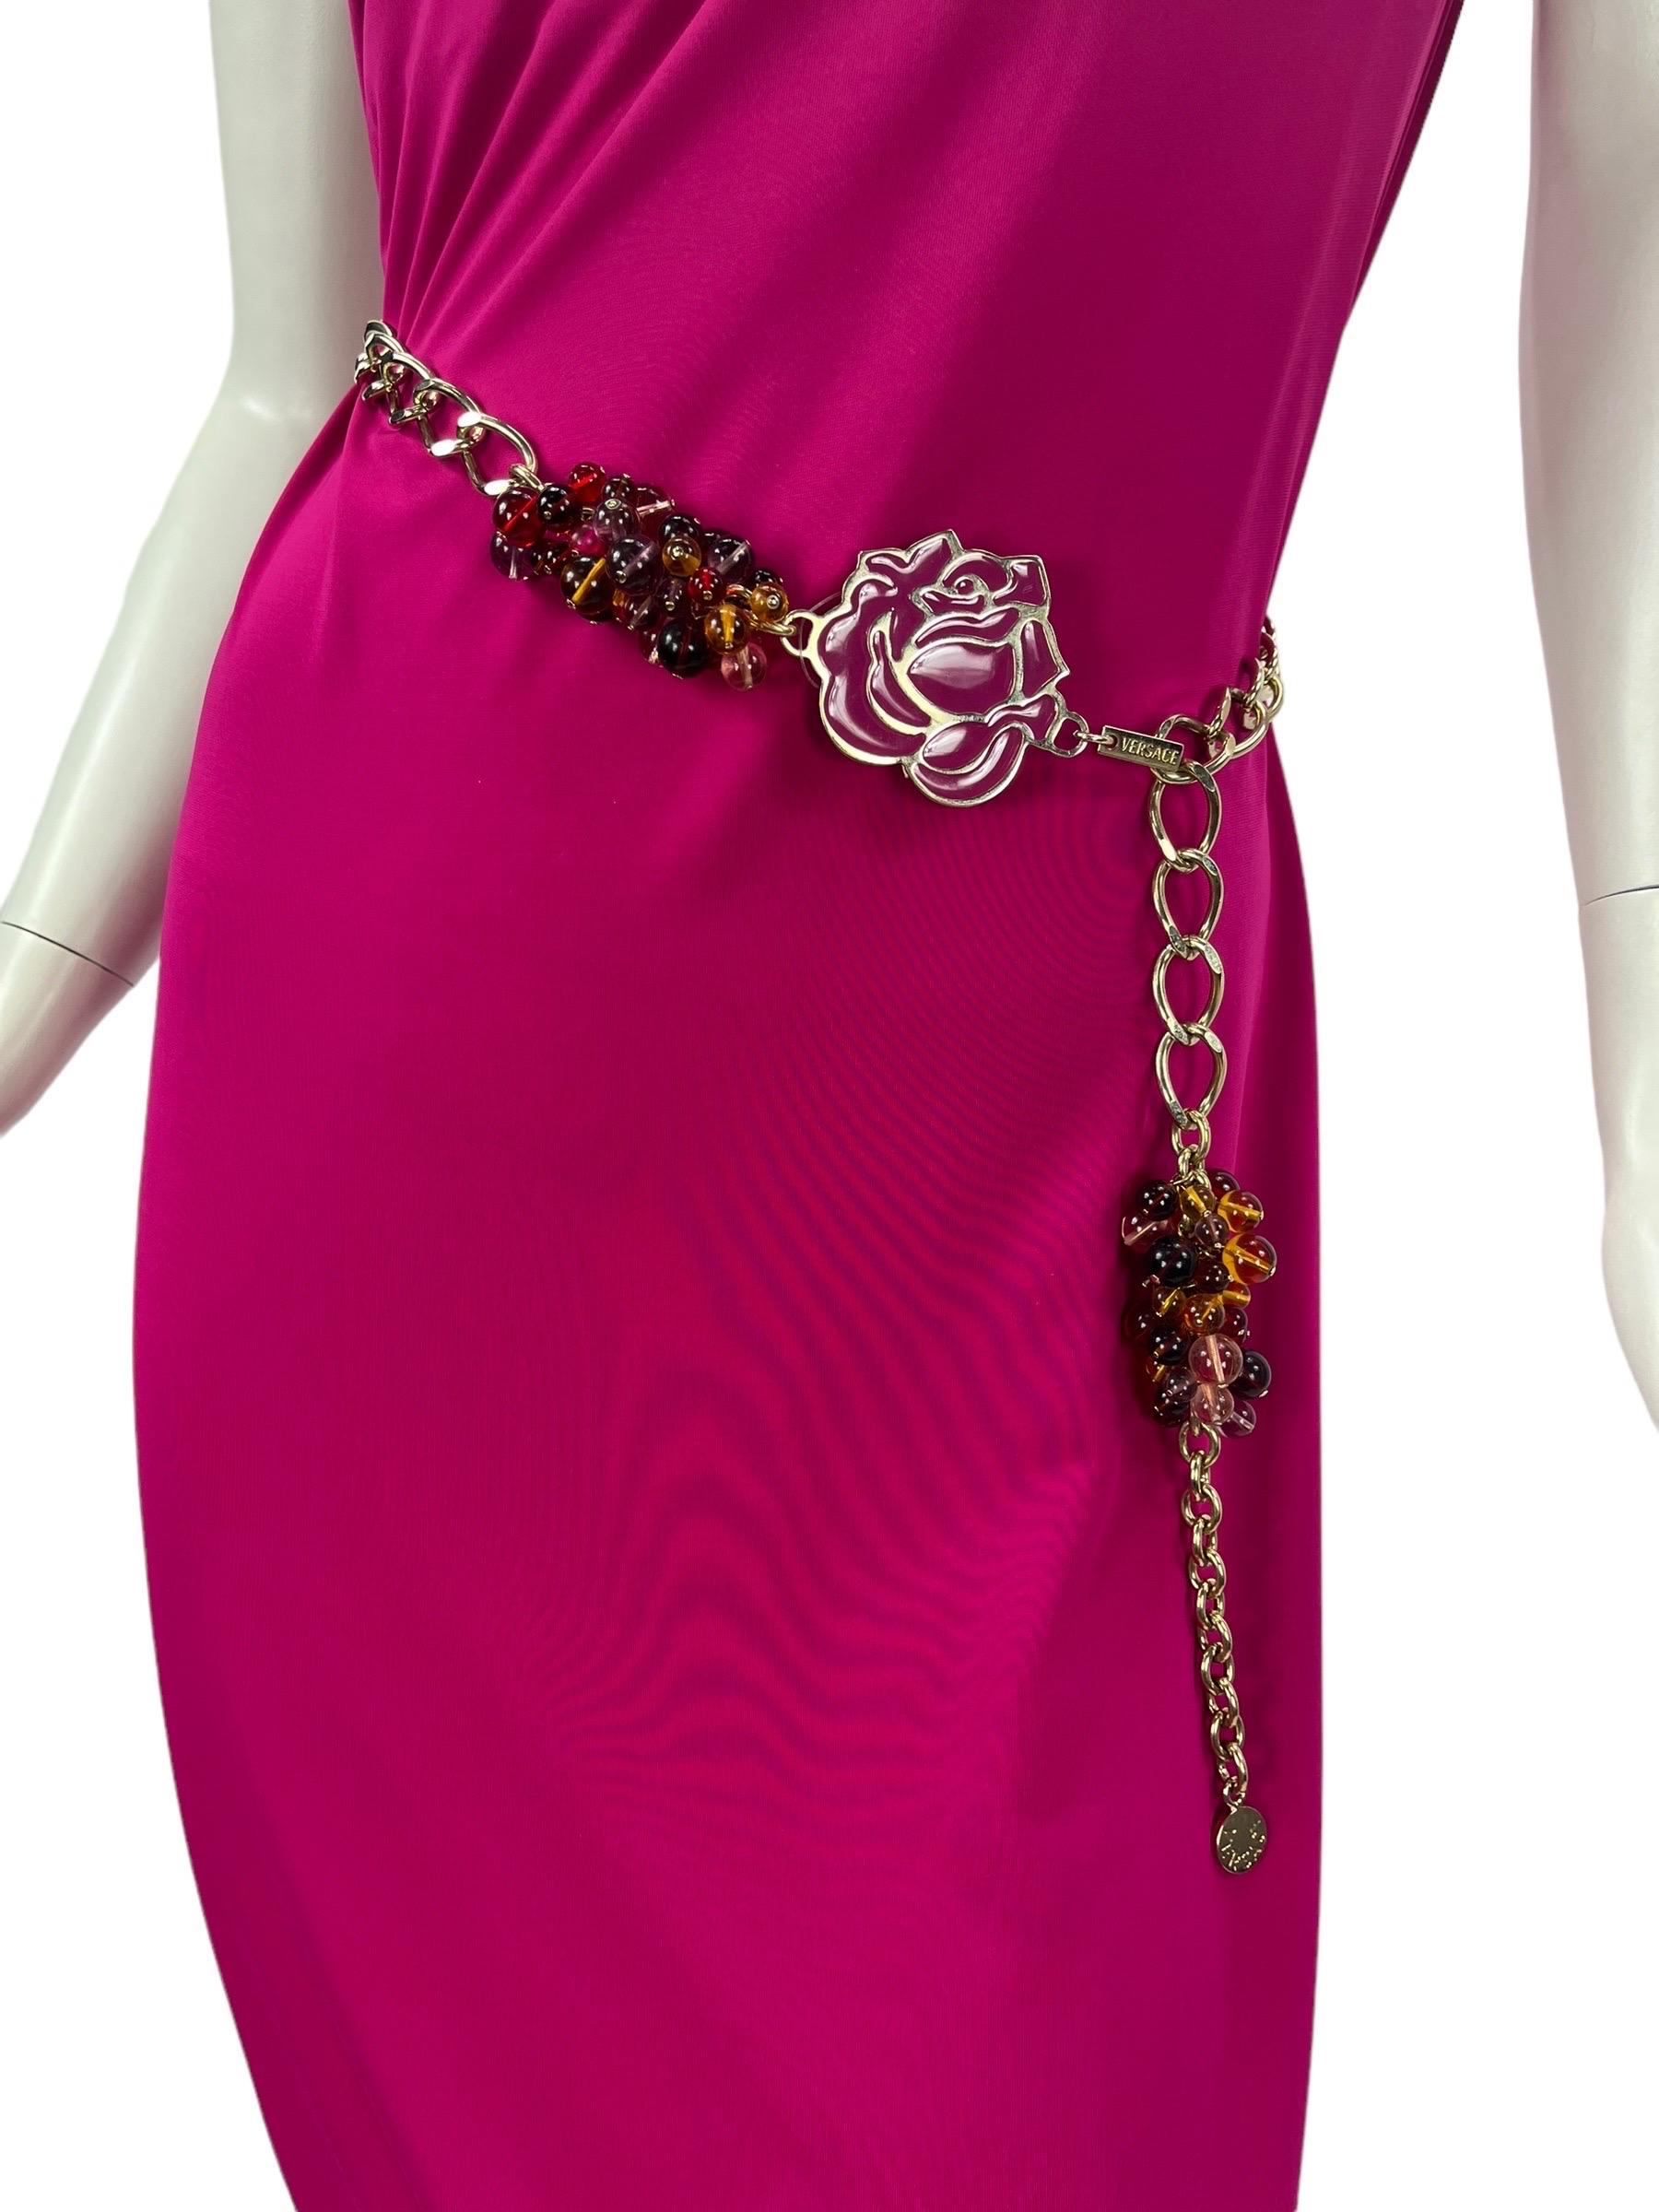 Women's 2005 Vintage Roberto Cavalli Fuchsia Pink Dress with Snake details Size 44 For Sale